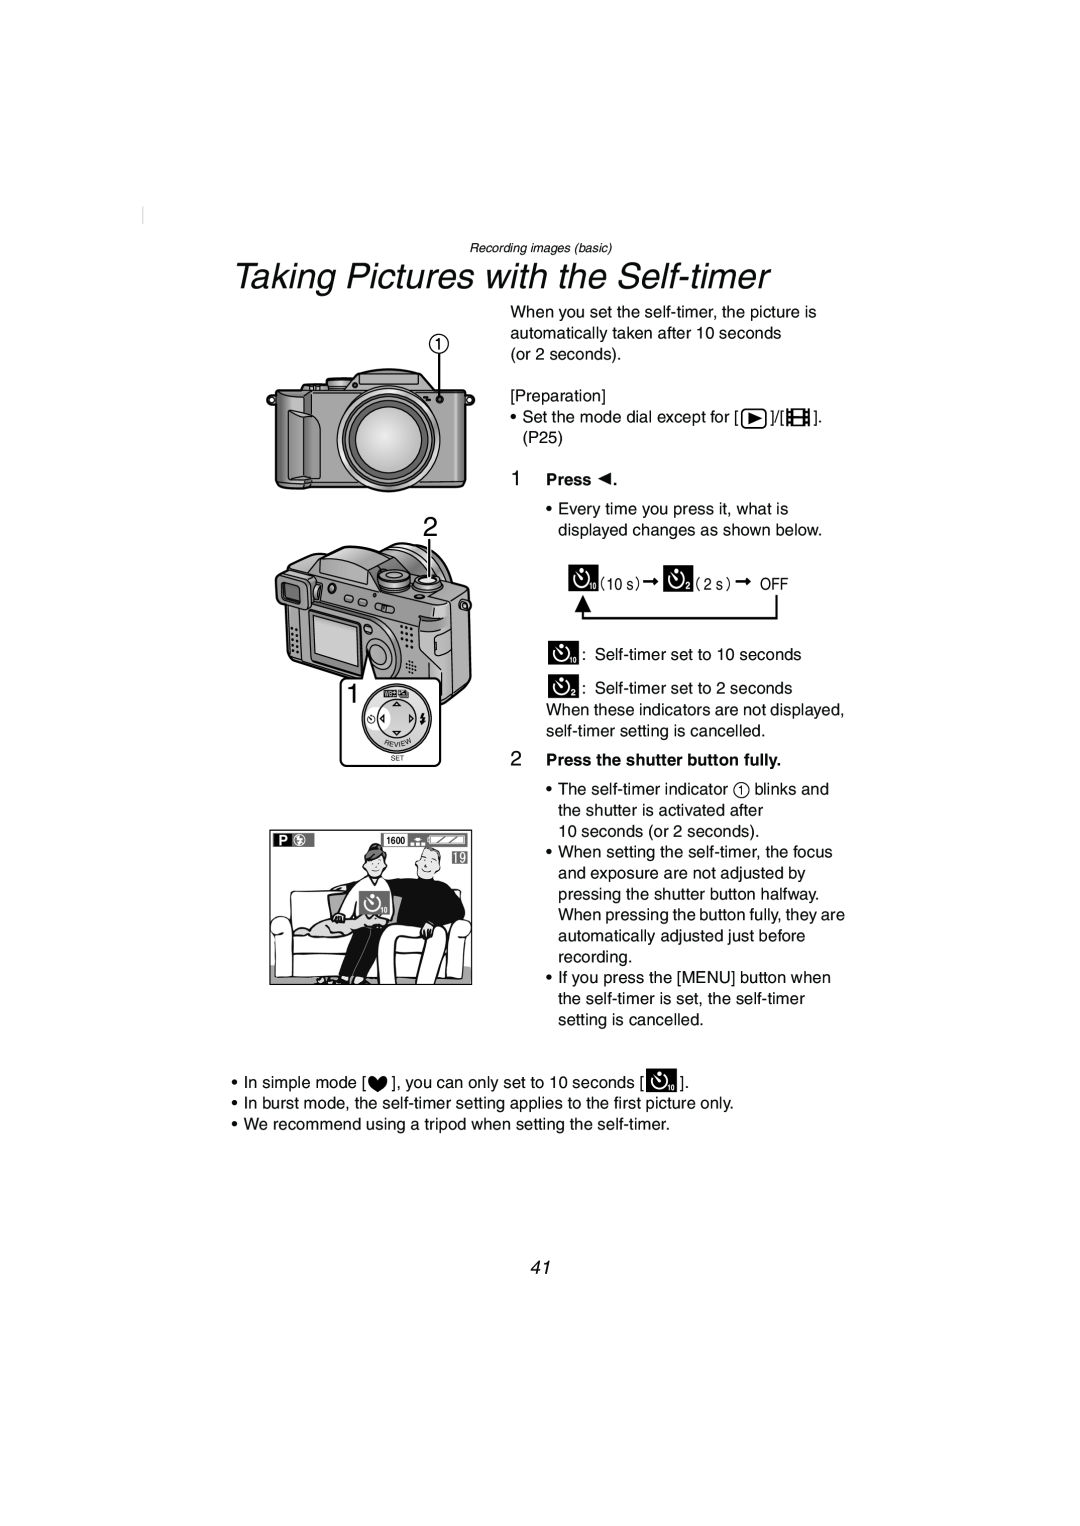 Panasonic DMC-FZ2PP operating instructions Taking Pictures with the Self-timer, Press the shutter button fully 